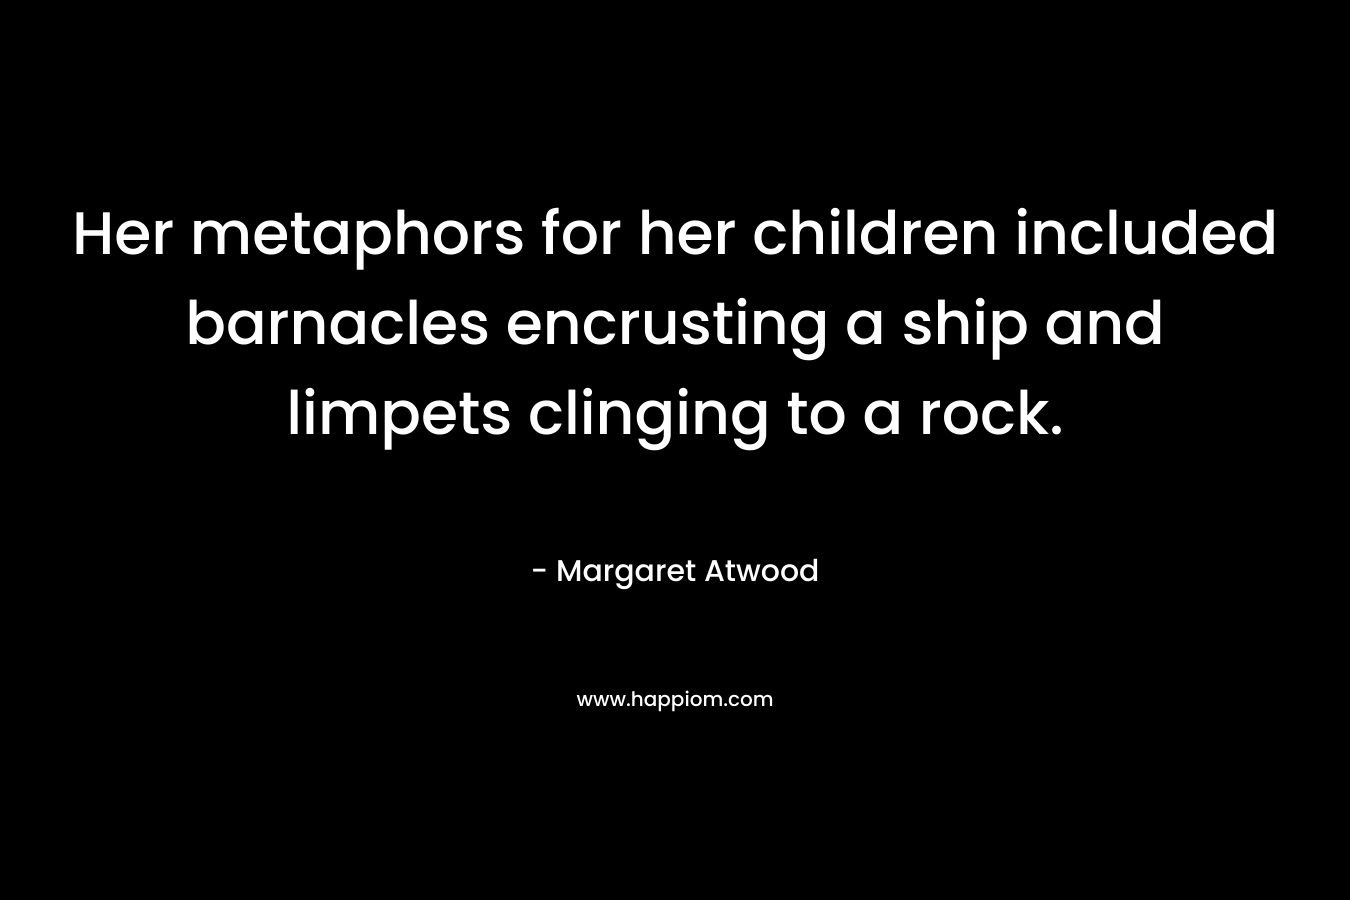 Her metaphors for her children included barnacles encrusting a ship and limpets clinging to a rock. – Margaret Atwood